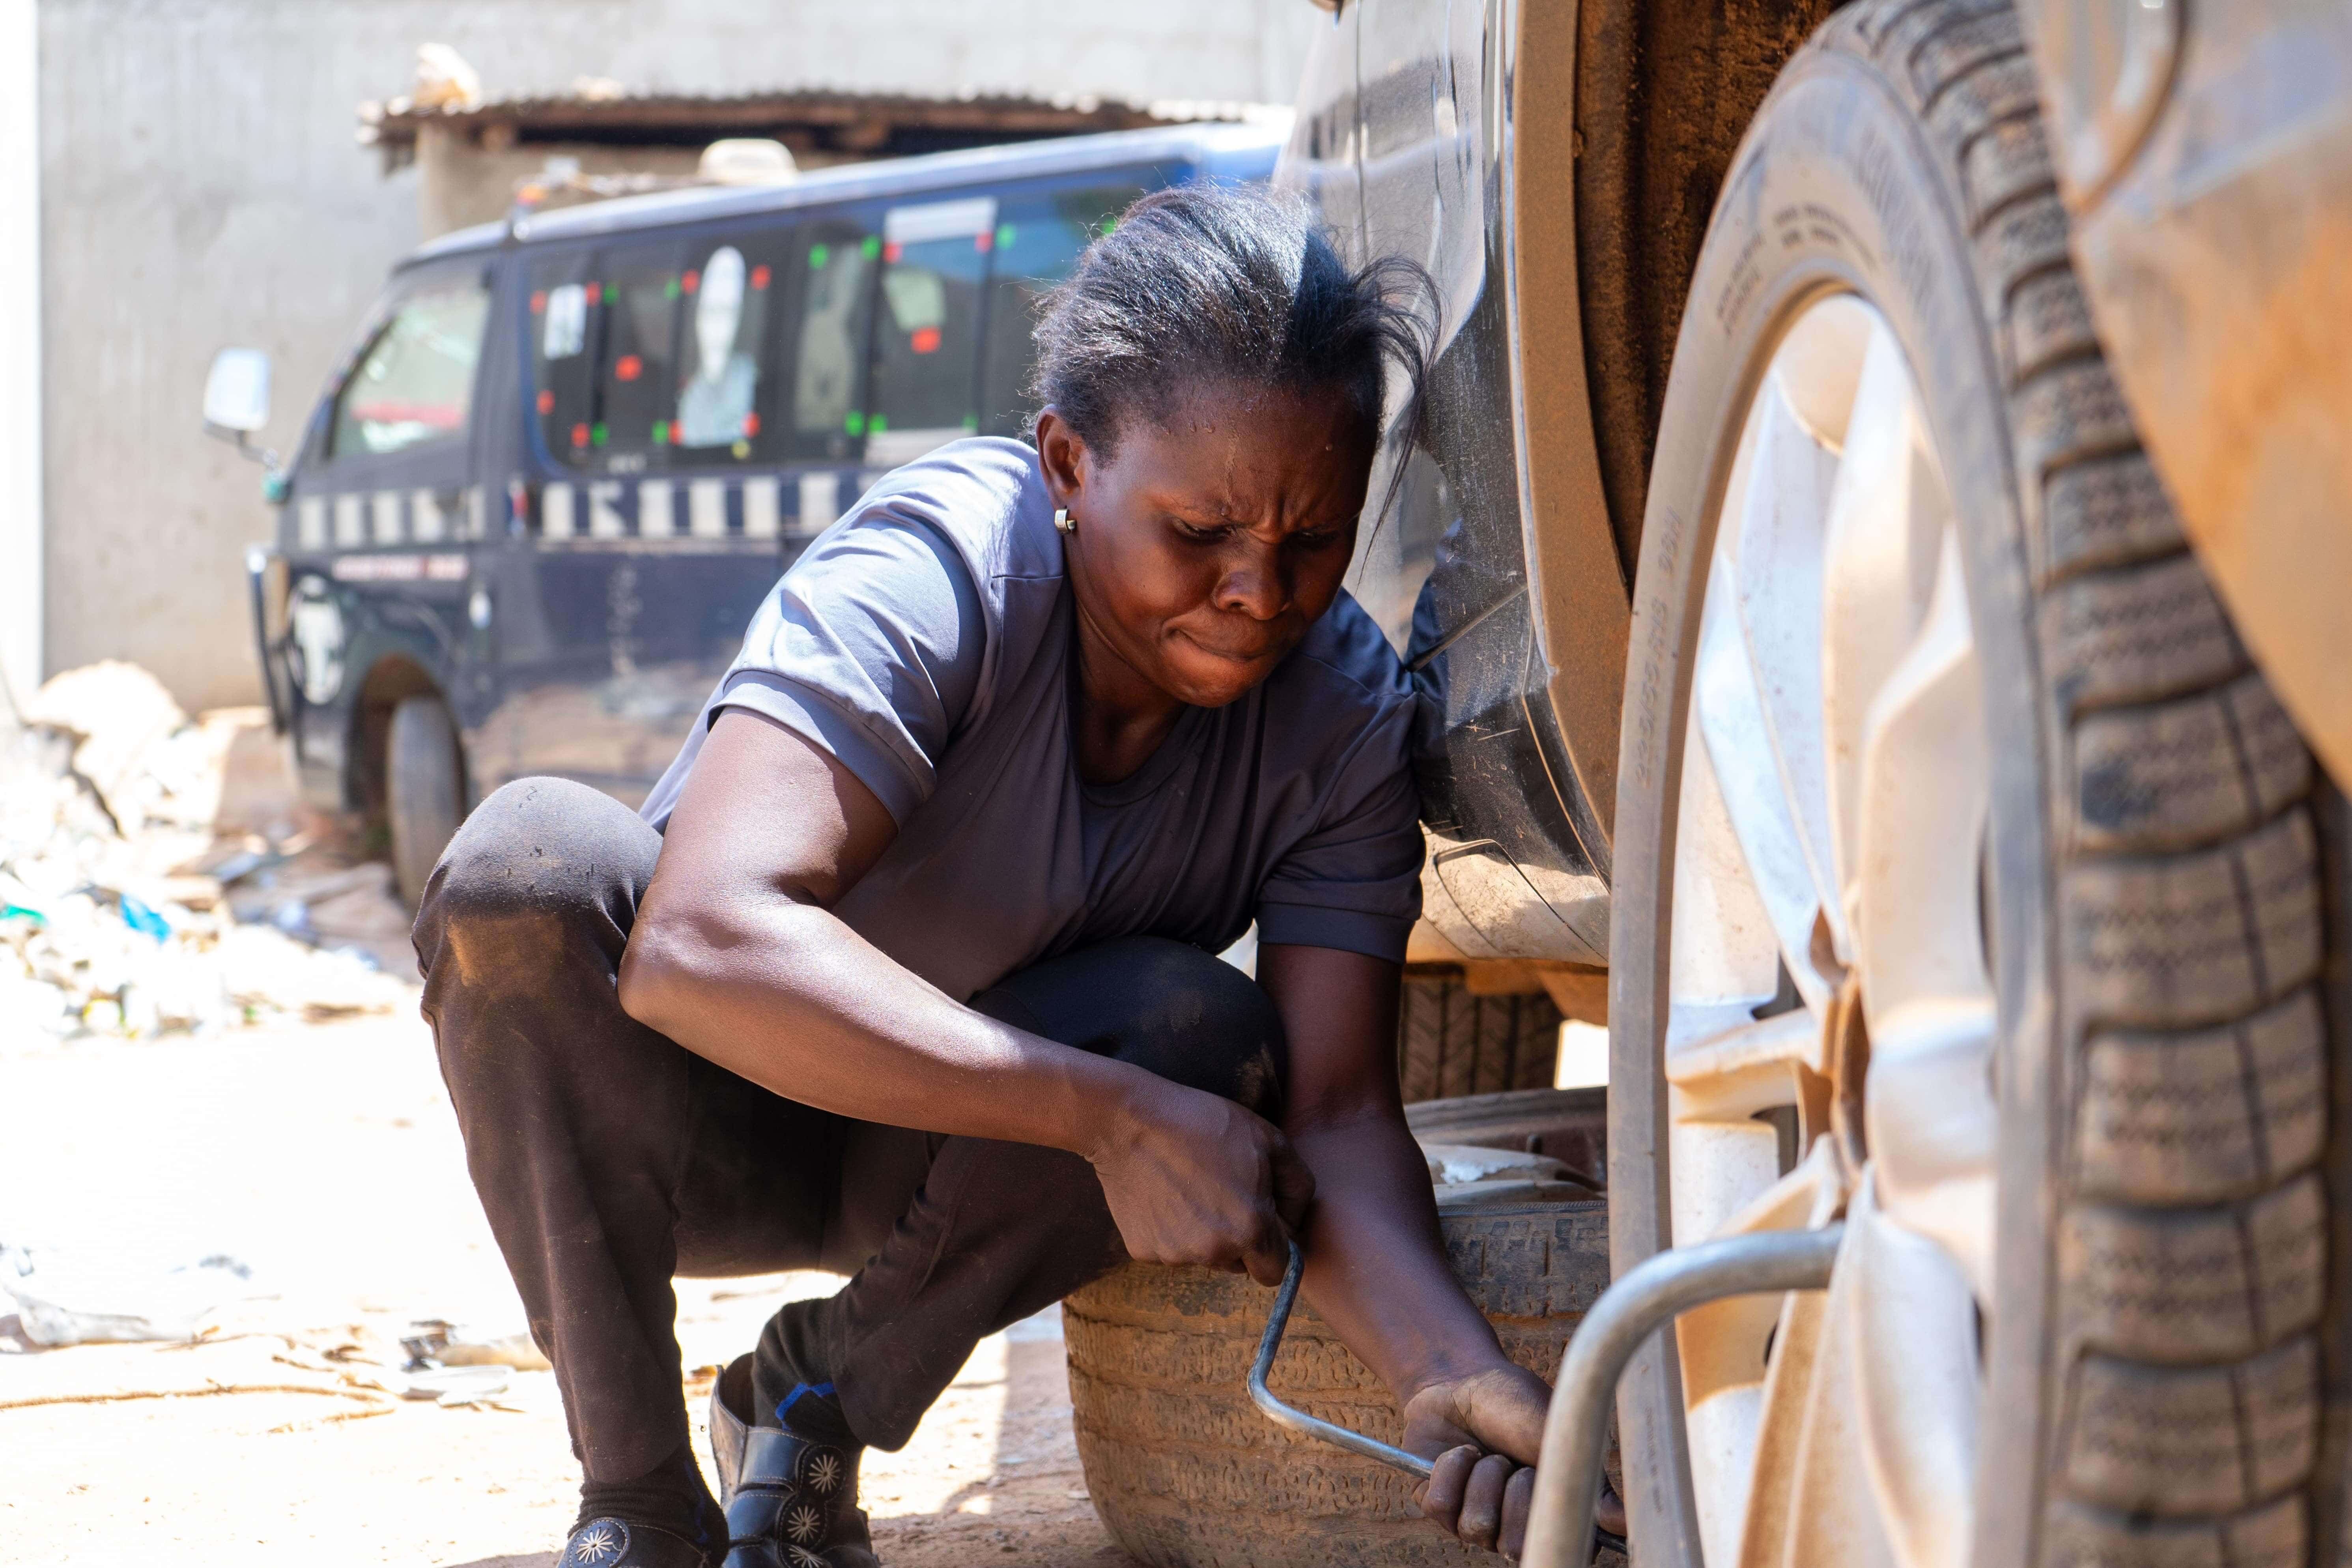 Florence Awor, a free style mom’s journey to mechanics and passion for car engines